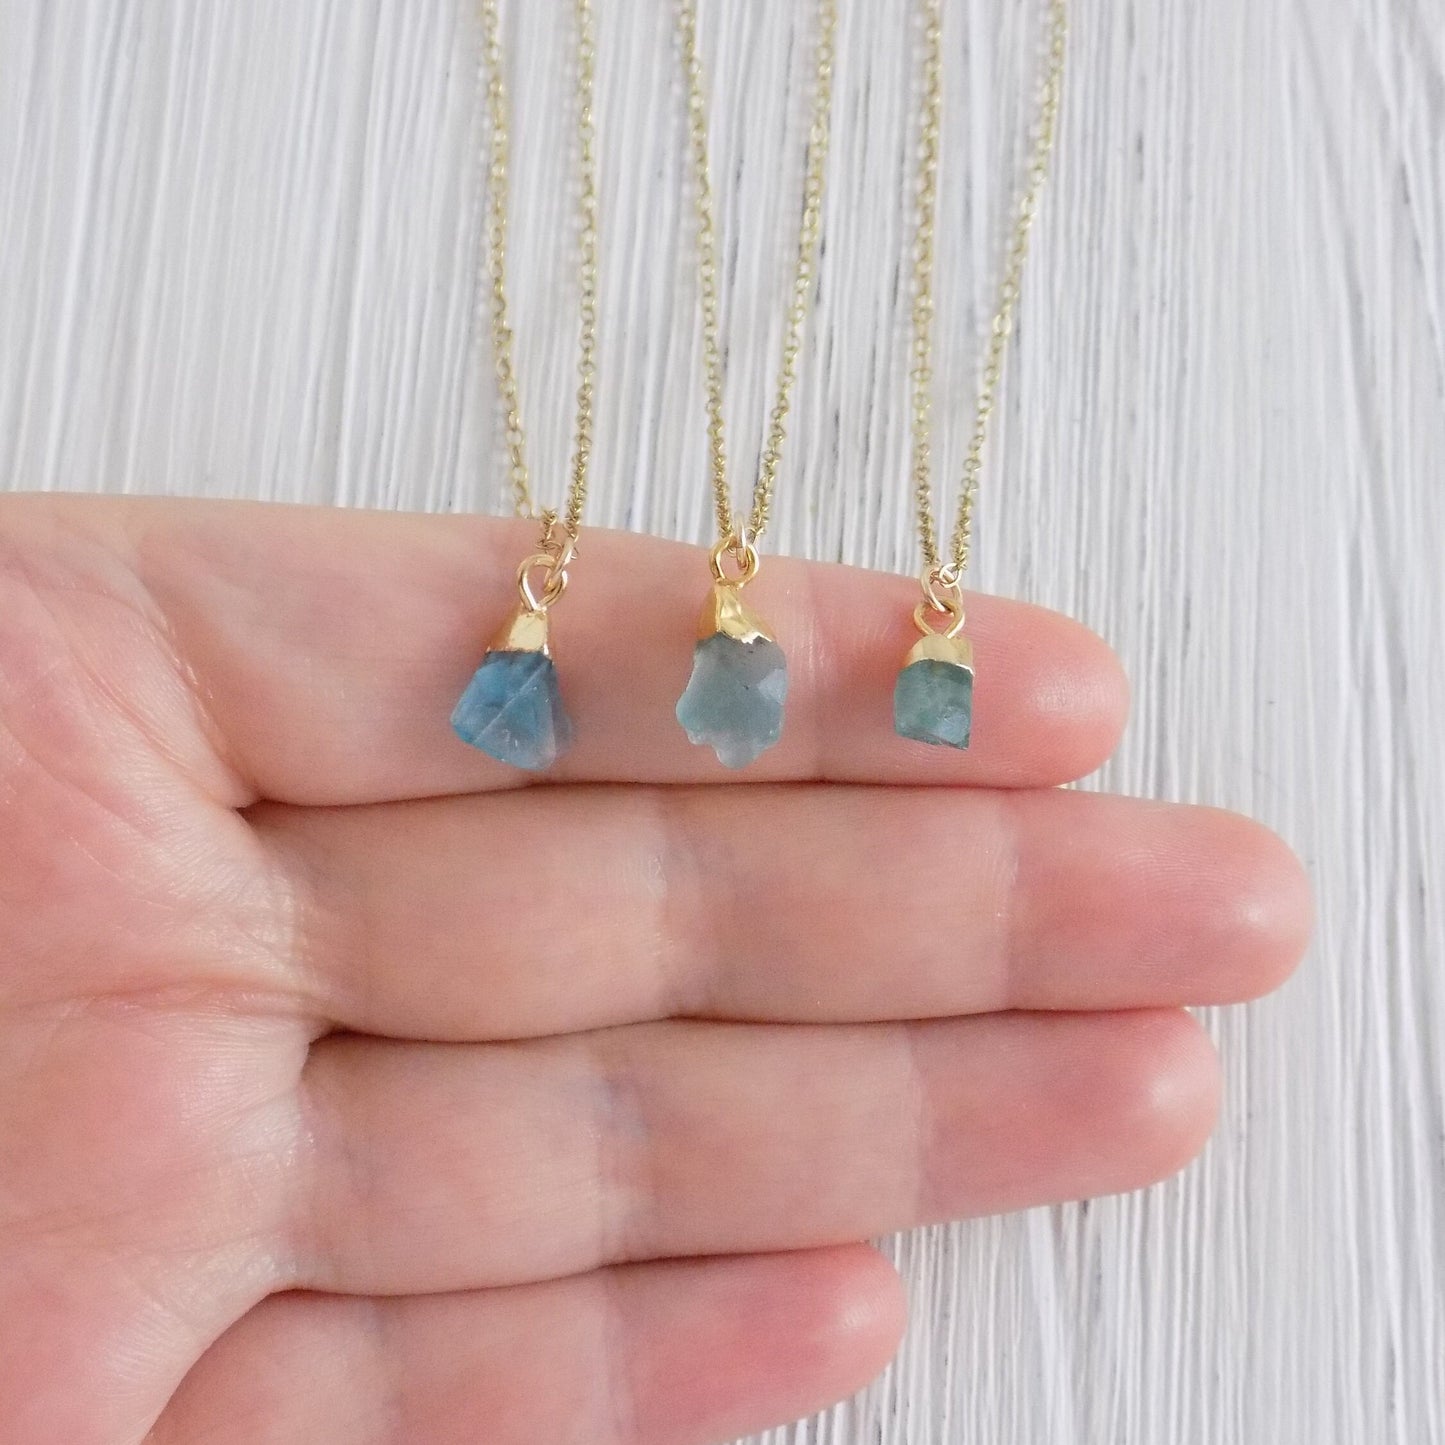 Tiny Raw Fluorite Gemstone Necklace on 14K Gold Filled Chain, M4-36